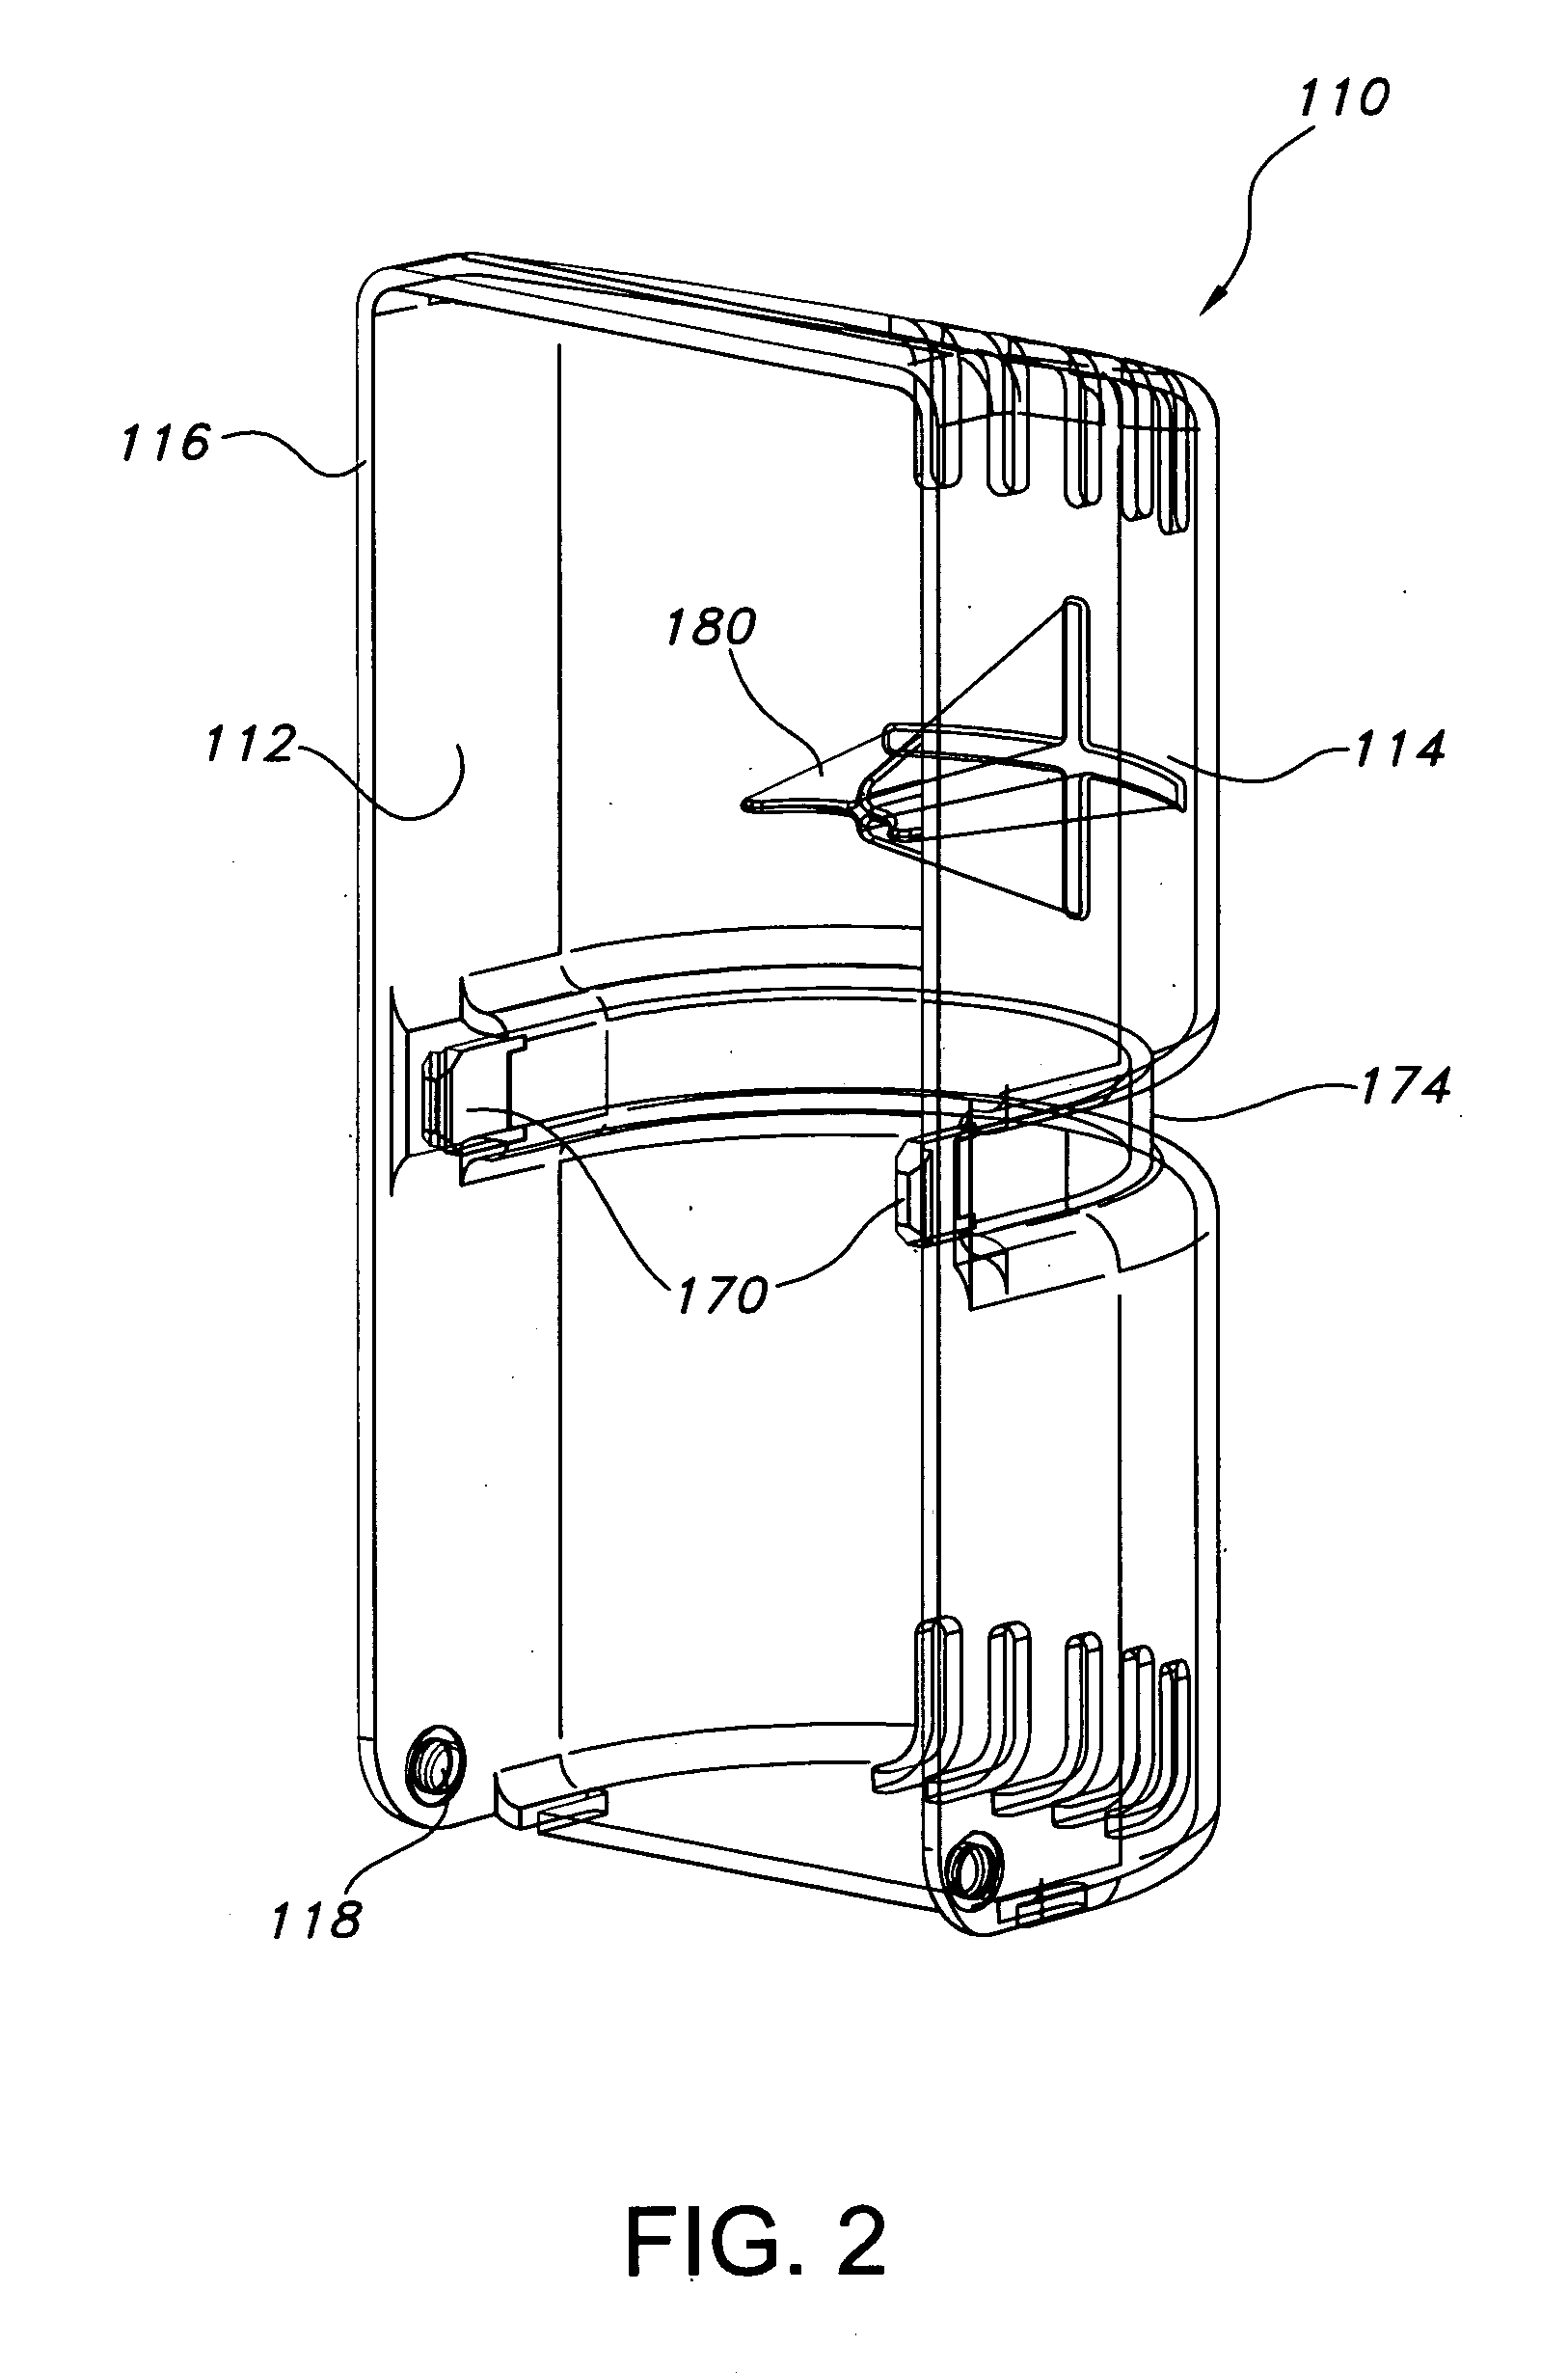 Auto-injector storage and dispensing unit